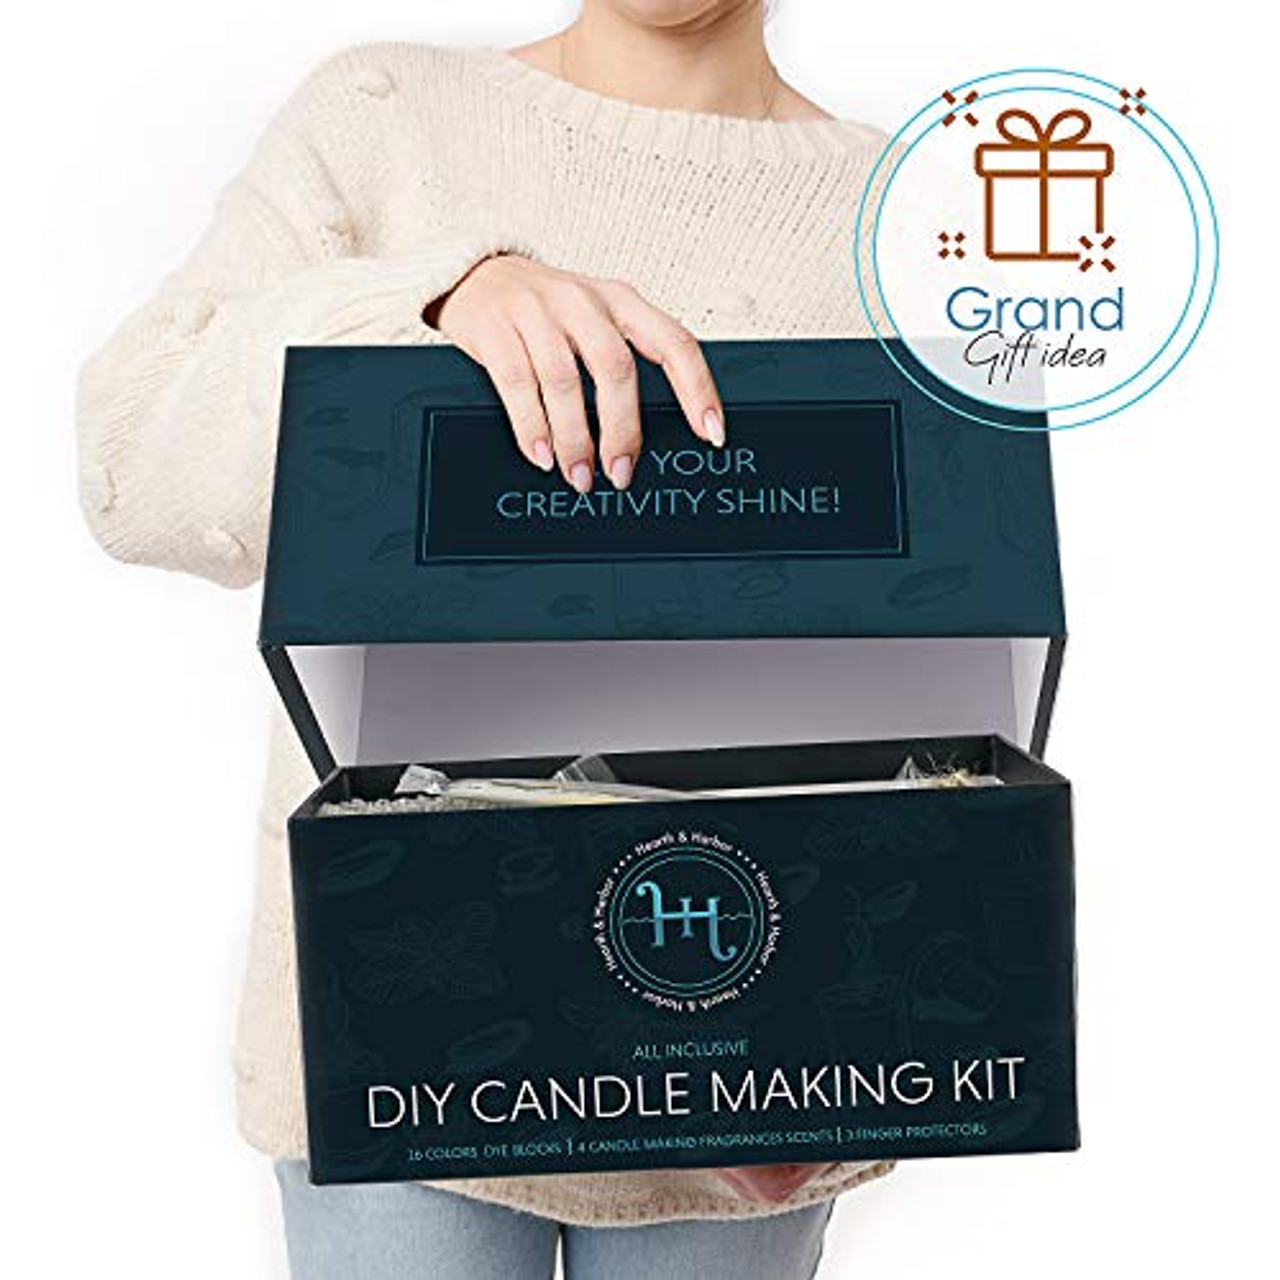 Ash & Harry Candle Making Kit with Natural Soy Wax for Candle Making - DIY  Candle Making